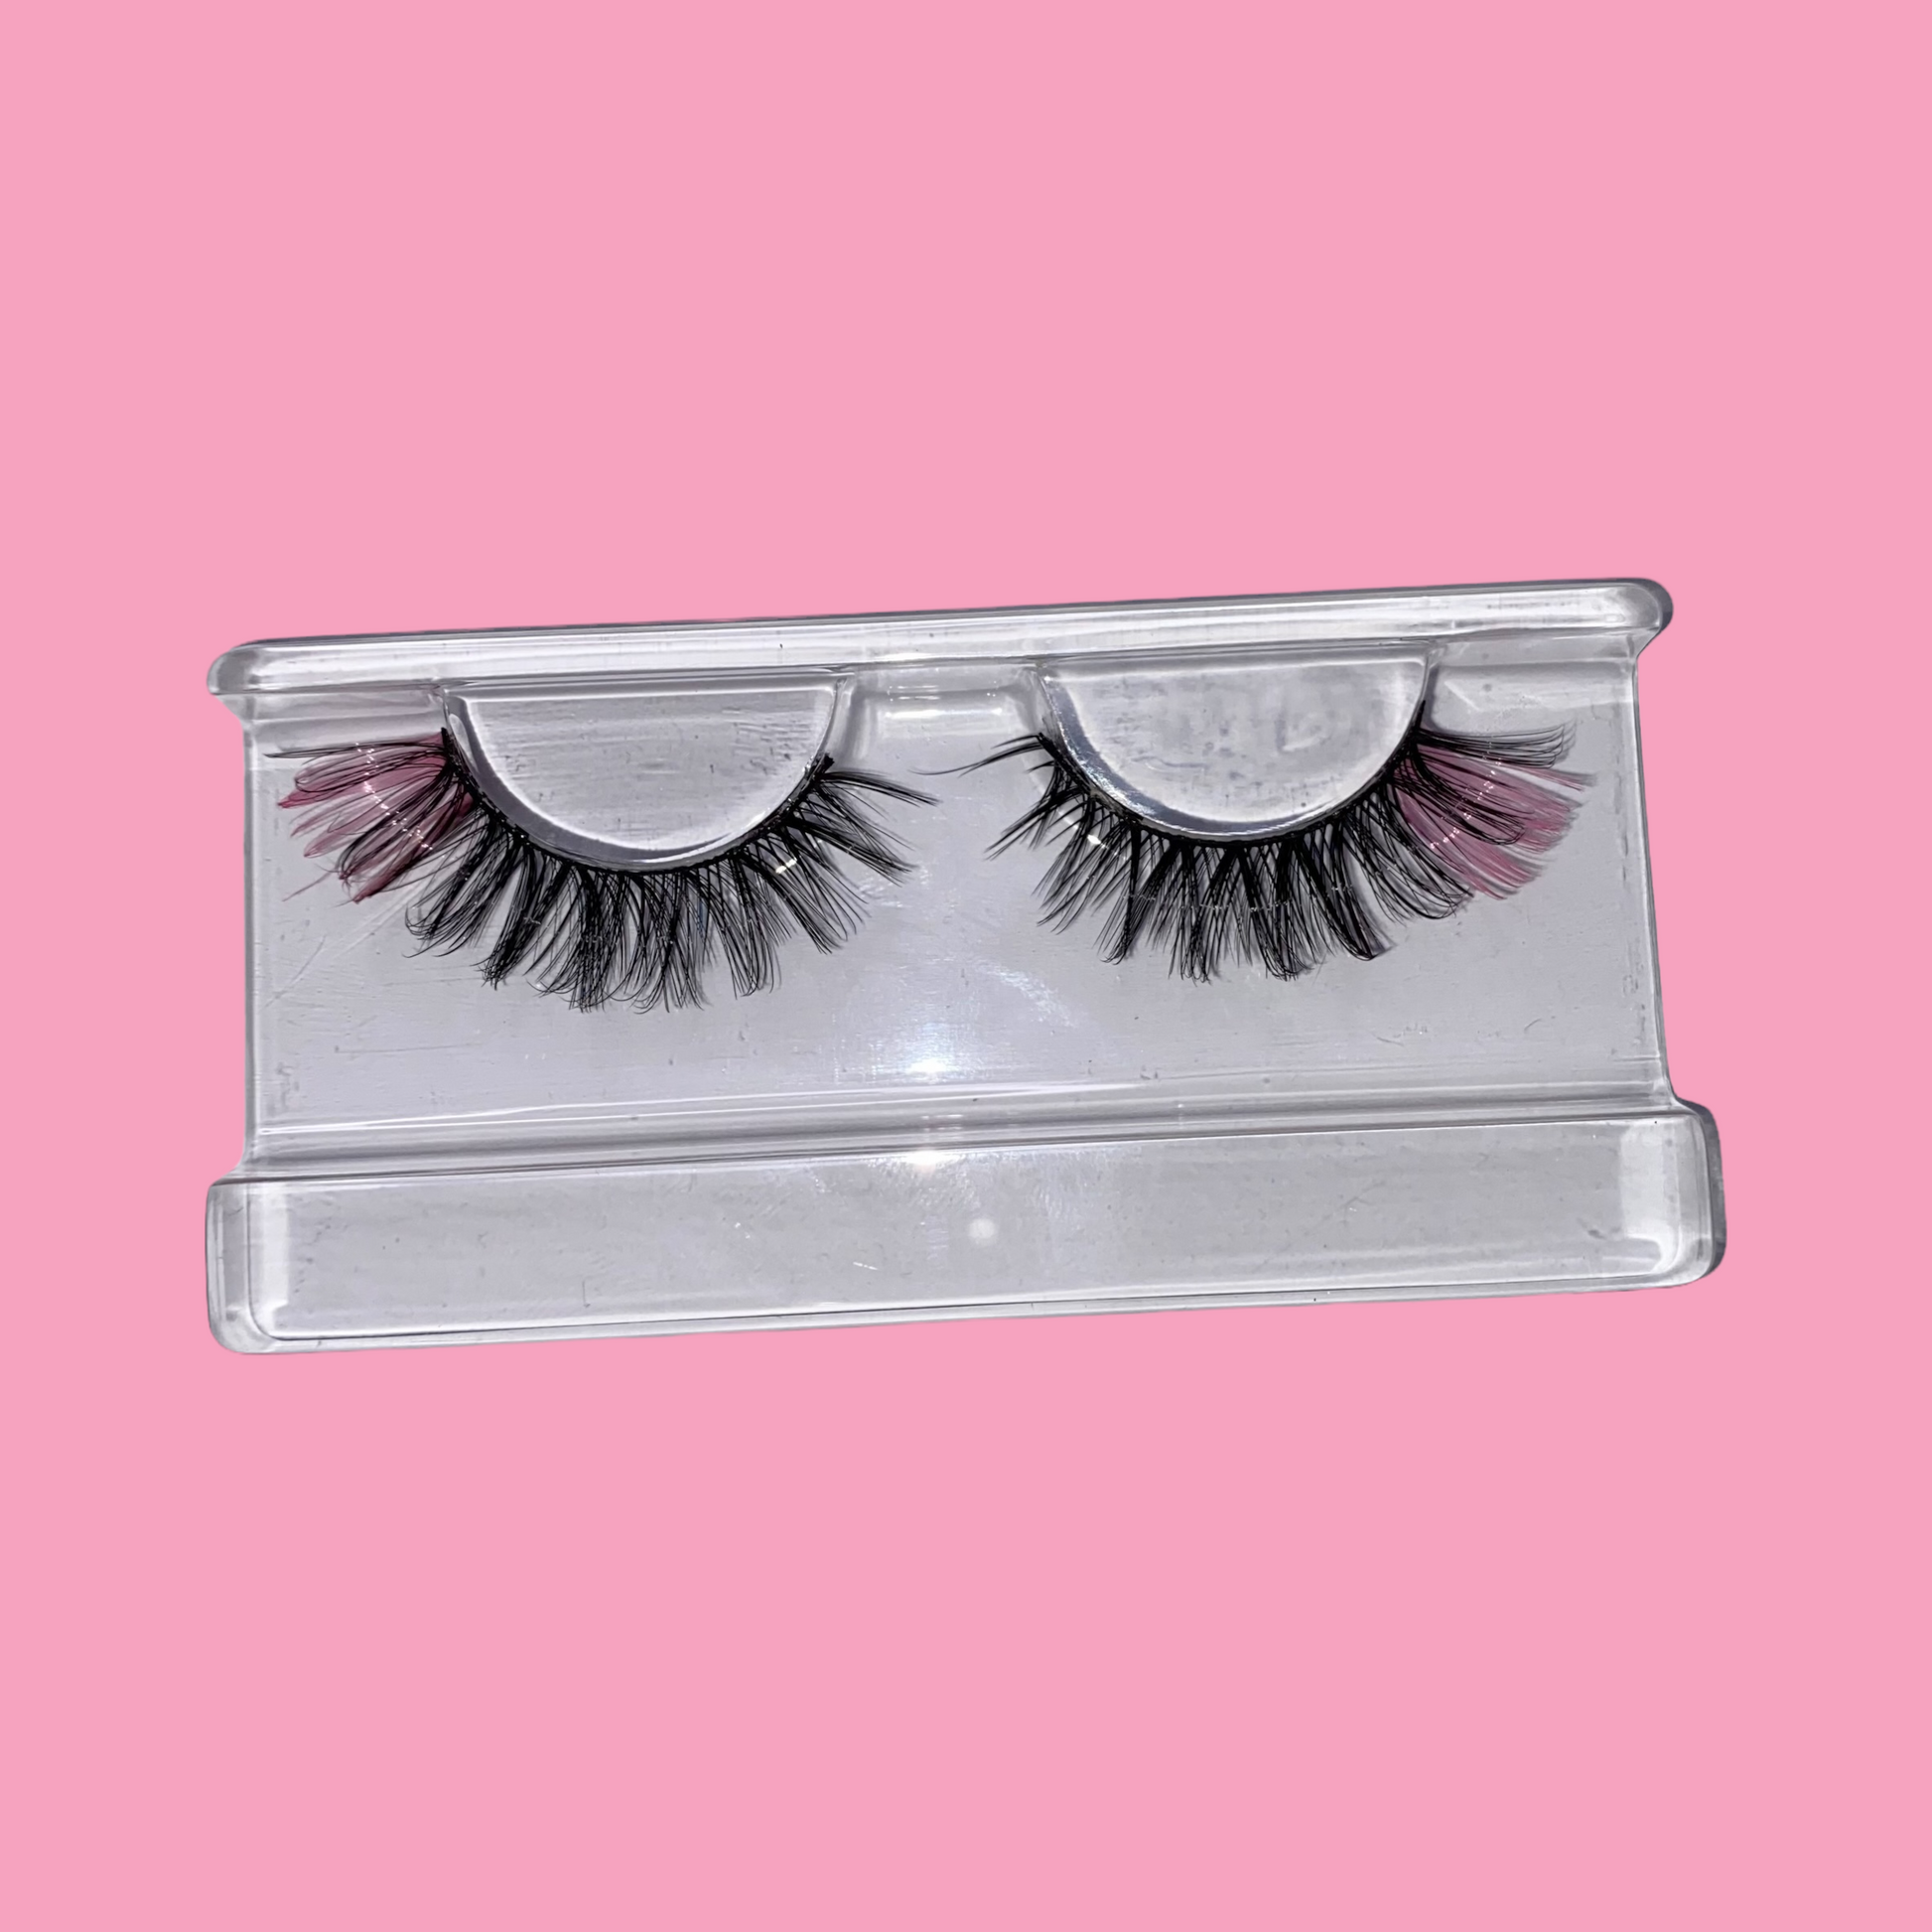 wispy cat eye strip lashes with pink ends